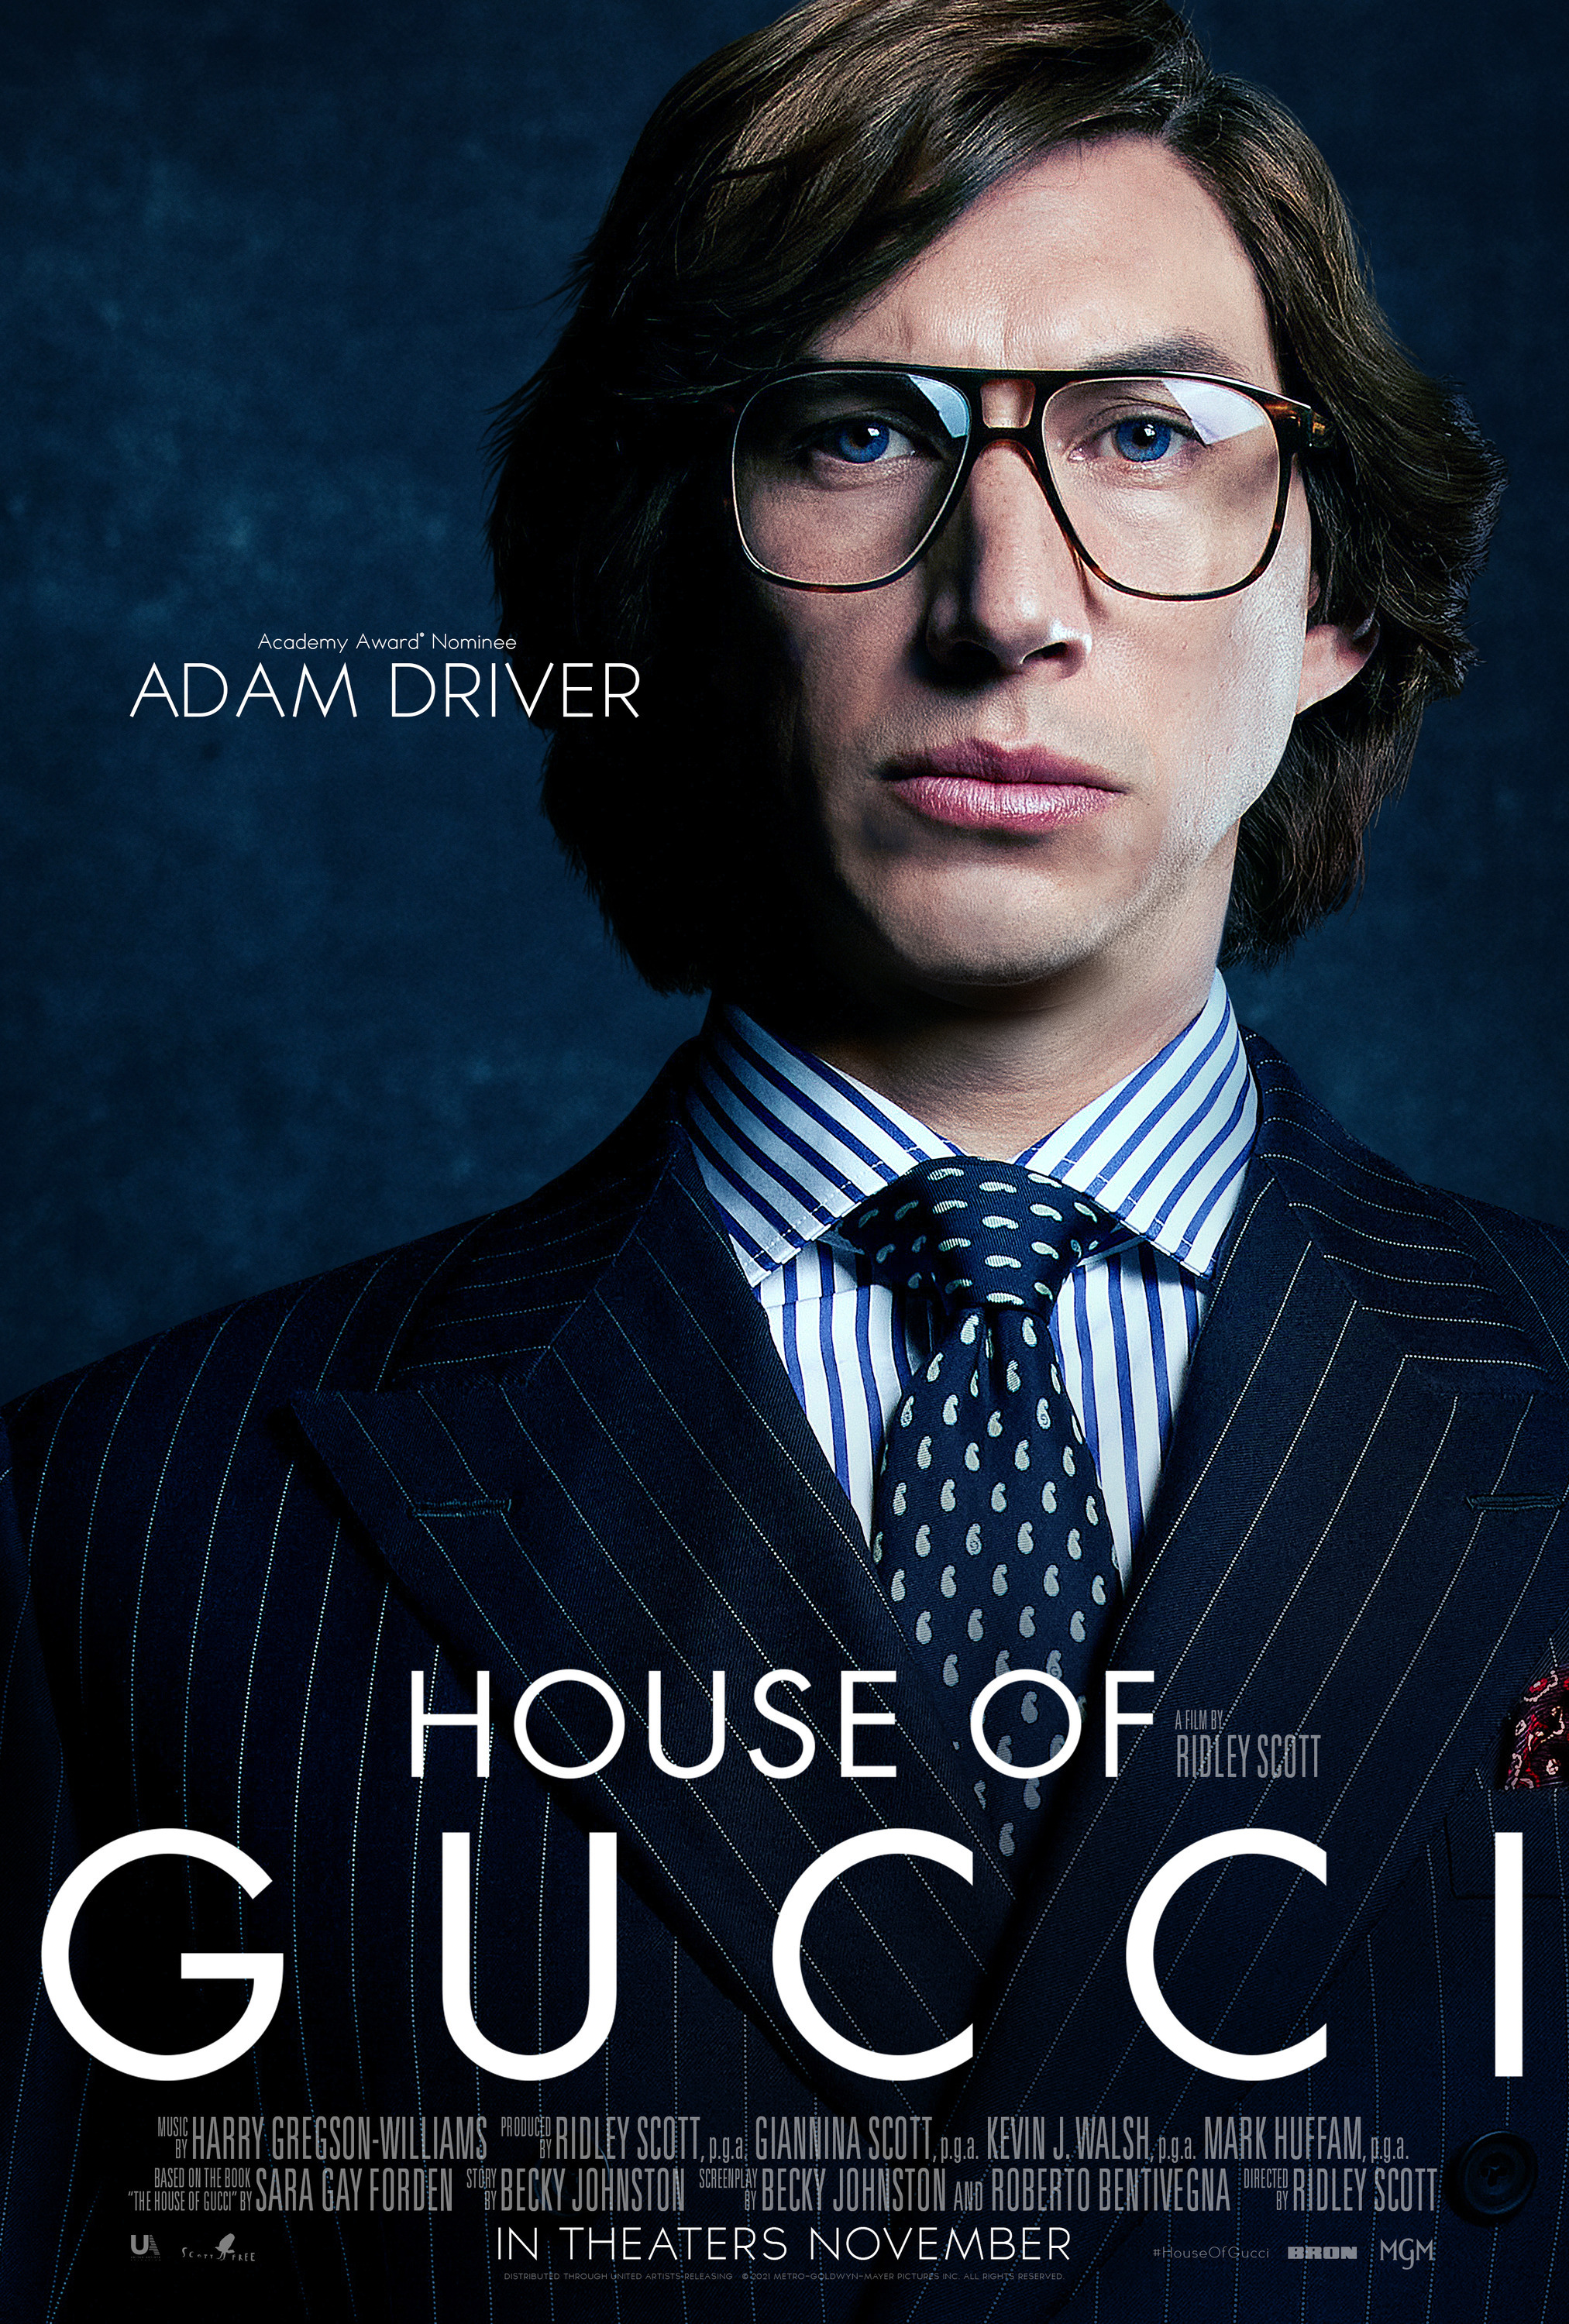 Posters of the characters of the film Gucci House - Movies, Poster, Actors and actresses, Lady Gaga, Adam Driver, Jared Leto, Jeremy Irons, Al Pacino, Longpost, Gucci House